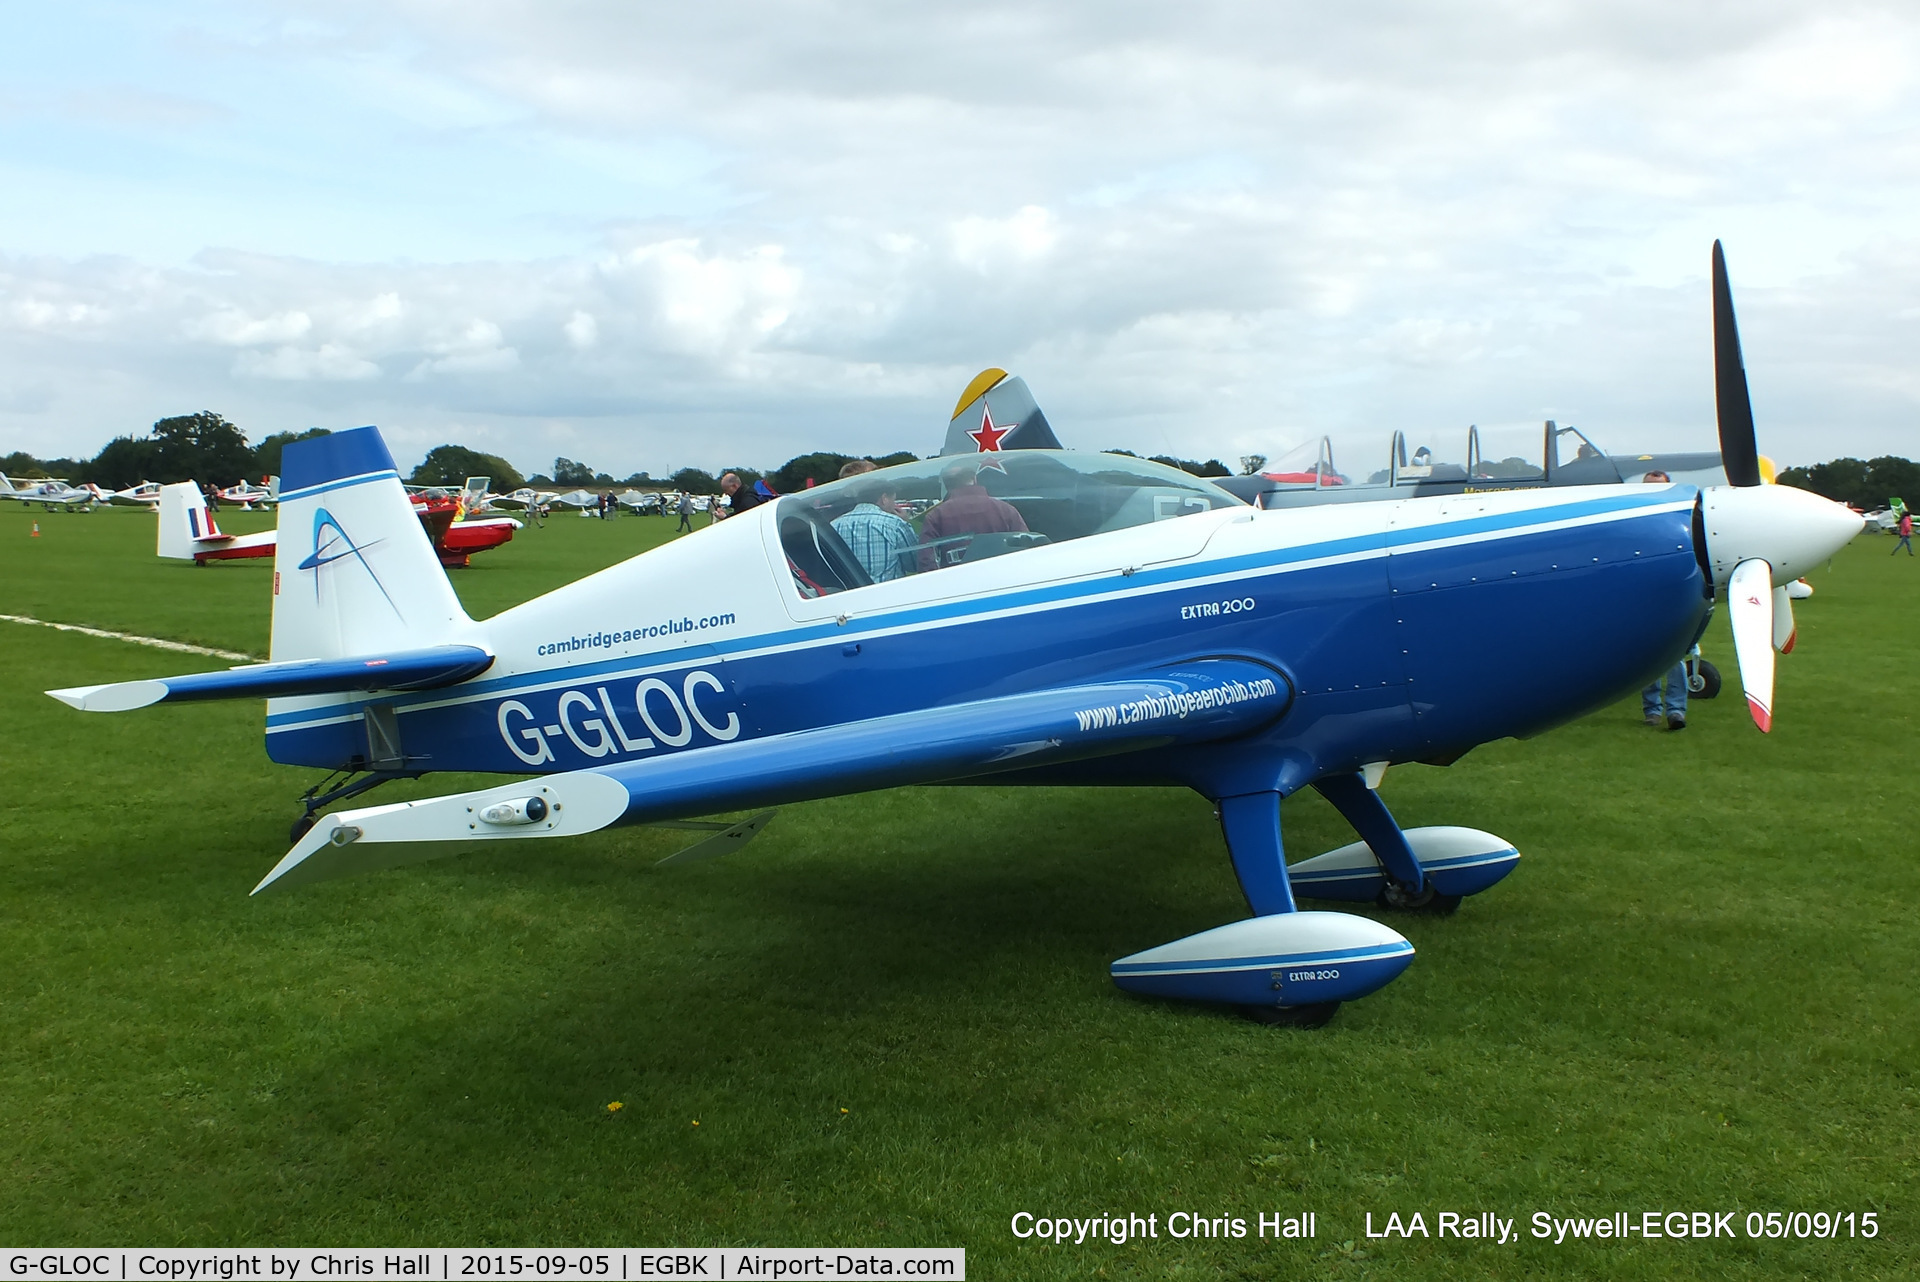 G-GLOC, 2007 Extra EA-300/200 C/N 1039, at the LAA Rally 2015, Sywell